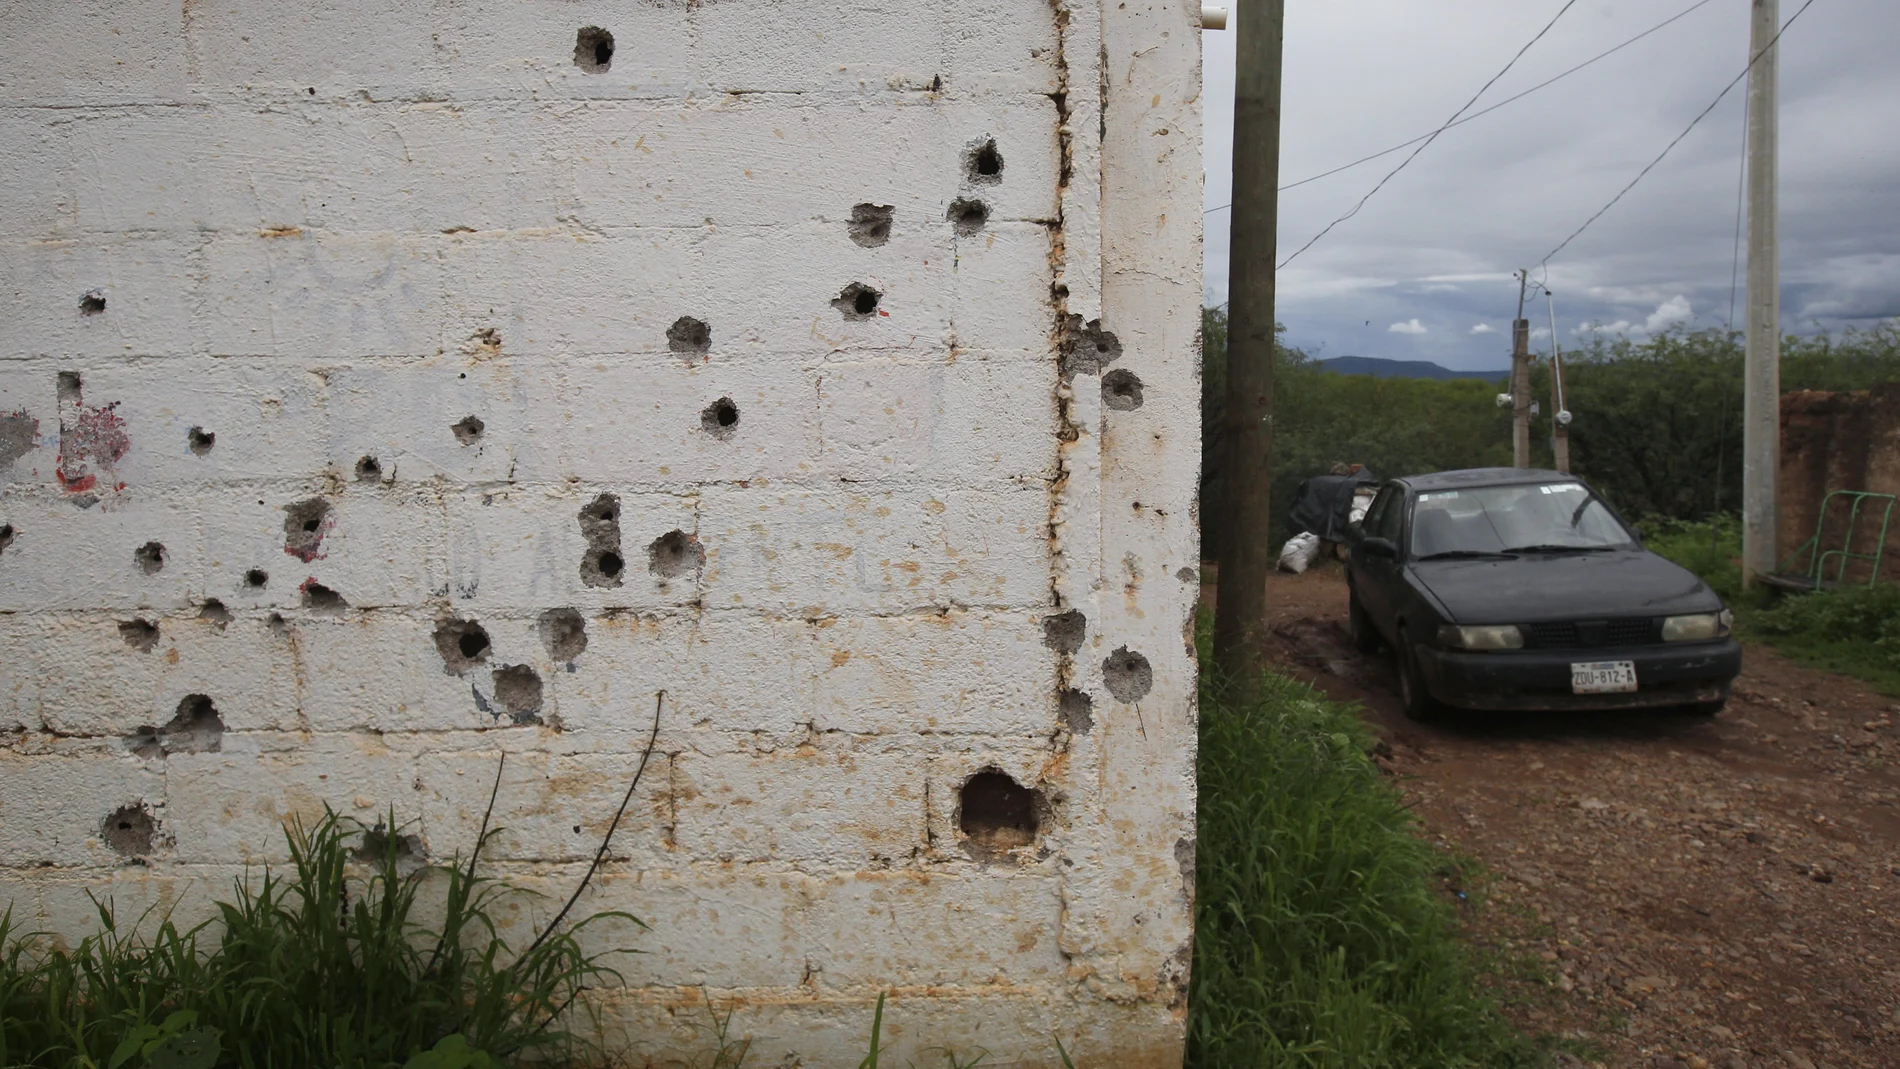 Bullet holes scar a homeâ€™s exterior wall, on the outskirts of the municipality of Valparaiso, Zacatecas state, Mexico, Wednesday, July 14, 2021. President Andres Manuel Lopez Obrador recognized that violence remains a problem. "If we don't manage to pacify Mexico, regardless of what has been done, we are not going to be able to historically prove our government," he said. (AP Photo/Marco Ugarte)